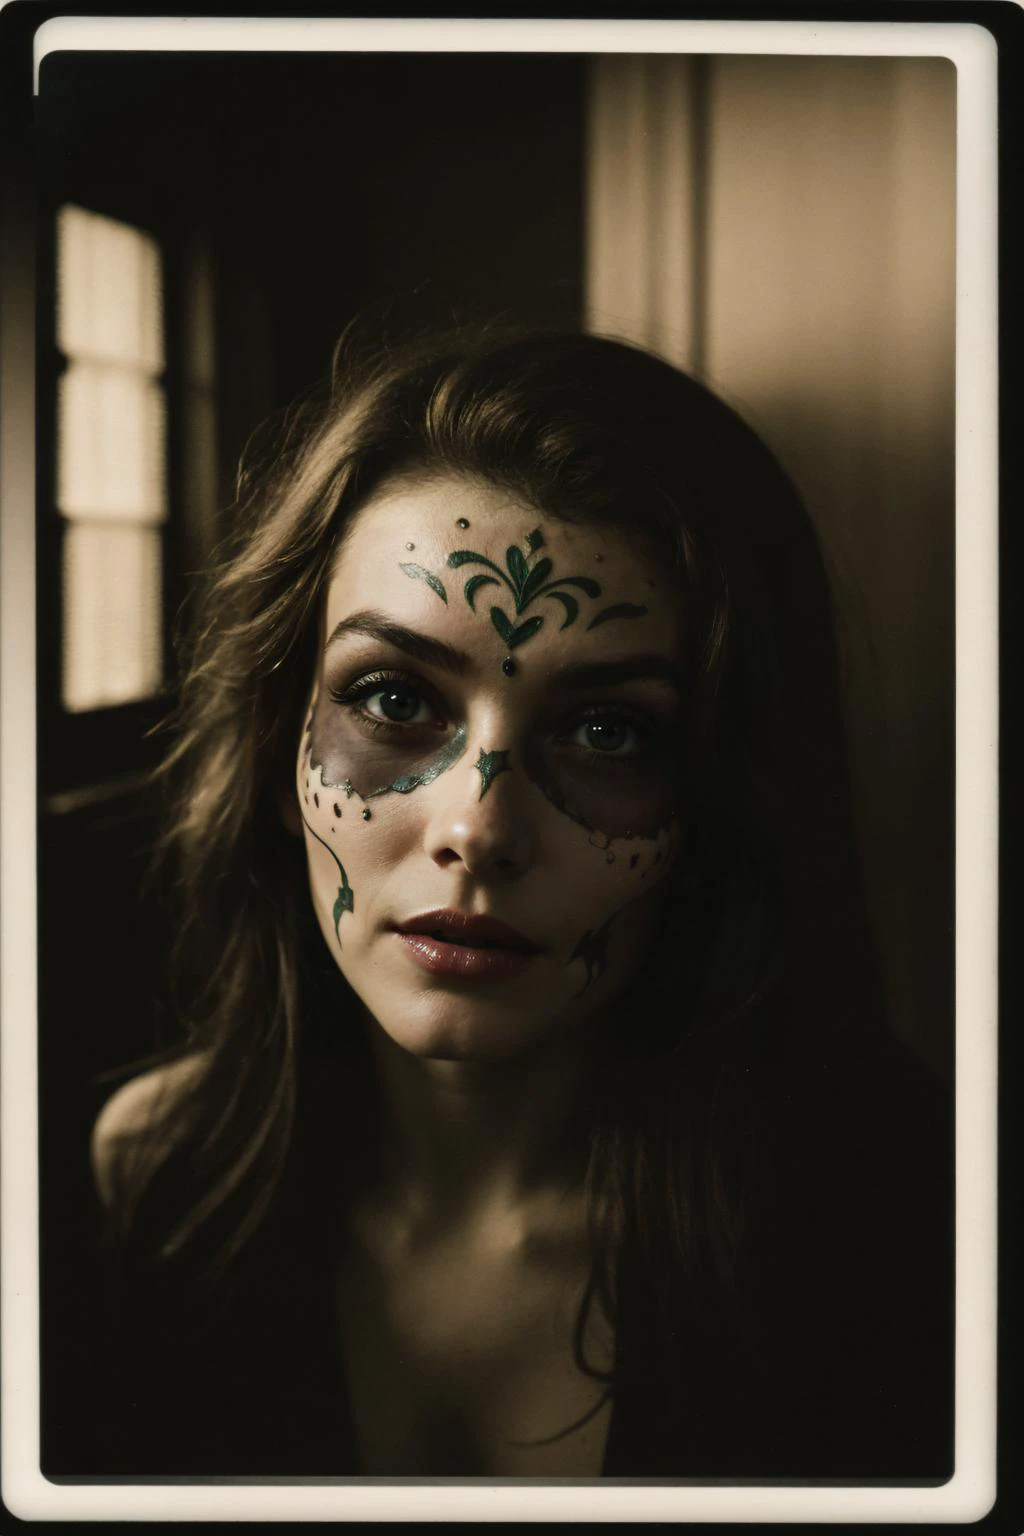 A pair of spectral eyes peering out from a dark, abandoned building., nsfw, polaroid photography, stunning blonde woman, group of women, Vintage-style homage, with an old-school, dimly lit living room and a TV flickering in the background.,  revealing costumes, A 'day of the dead' costume, showcasing intricate sugar skull makeup and vibrant attire, film grain, chiaroscuro epiCSepia